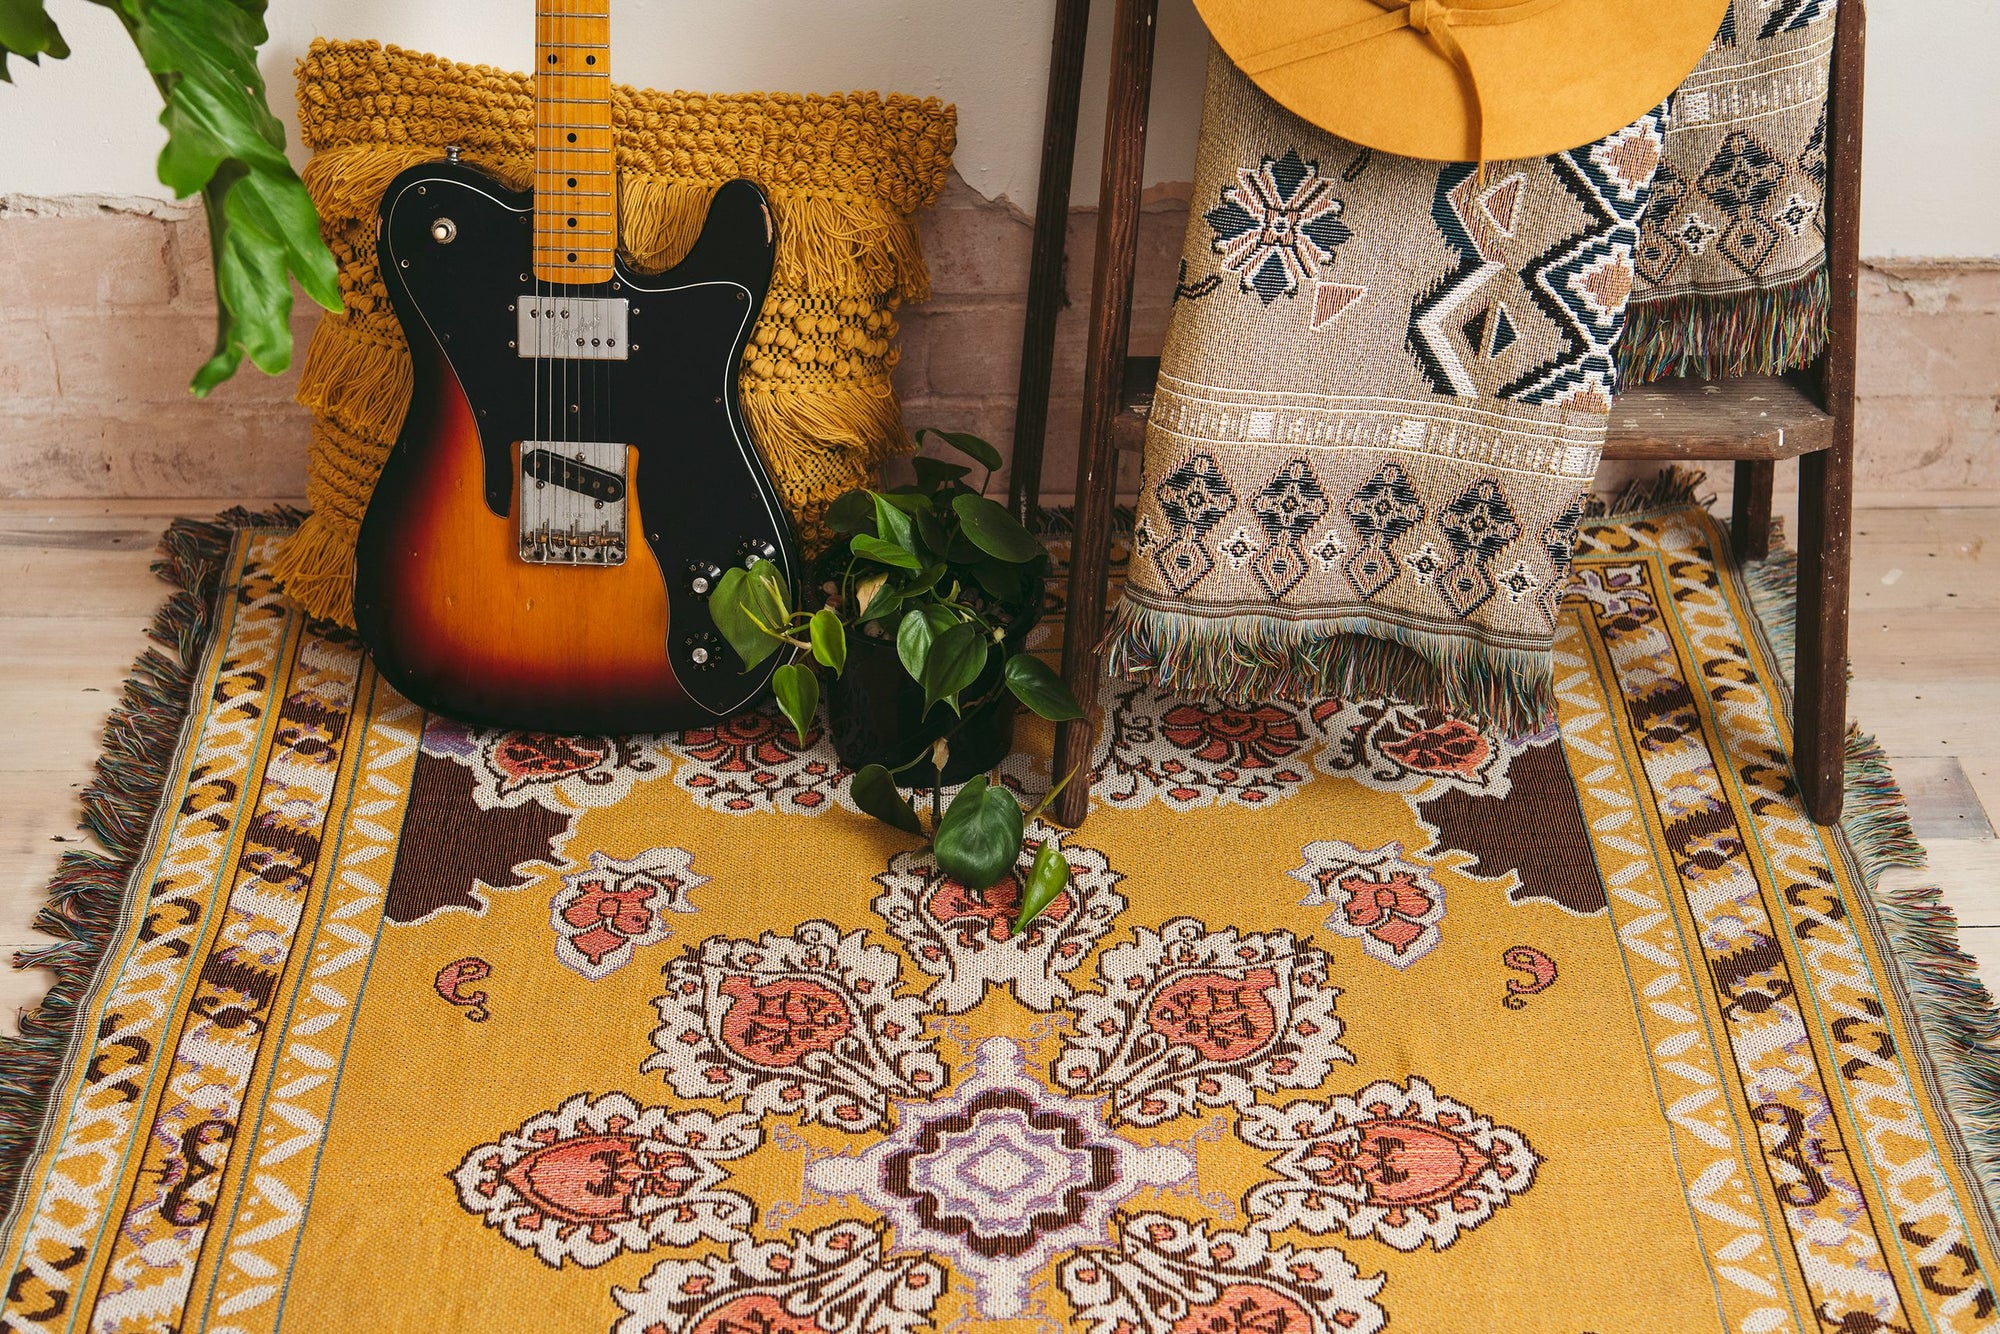 Hendeer 'HERE COMES THE SUN' WOVEN PICNIC RUG